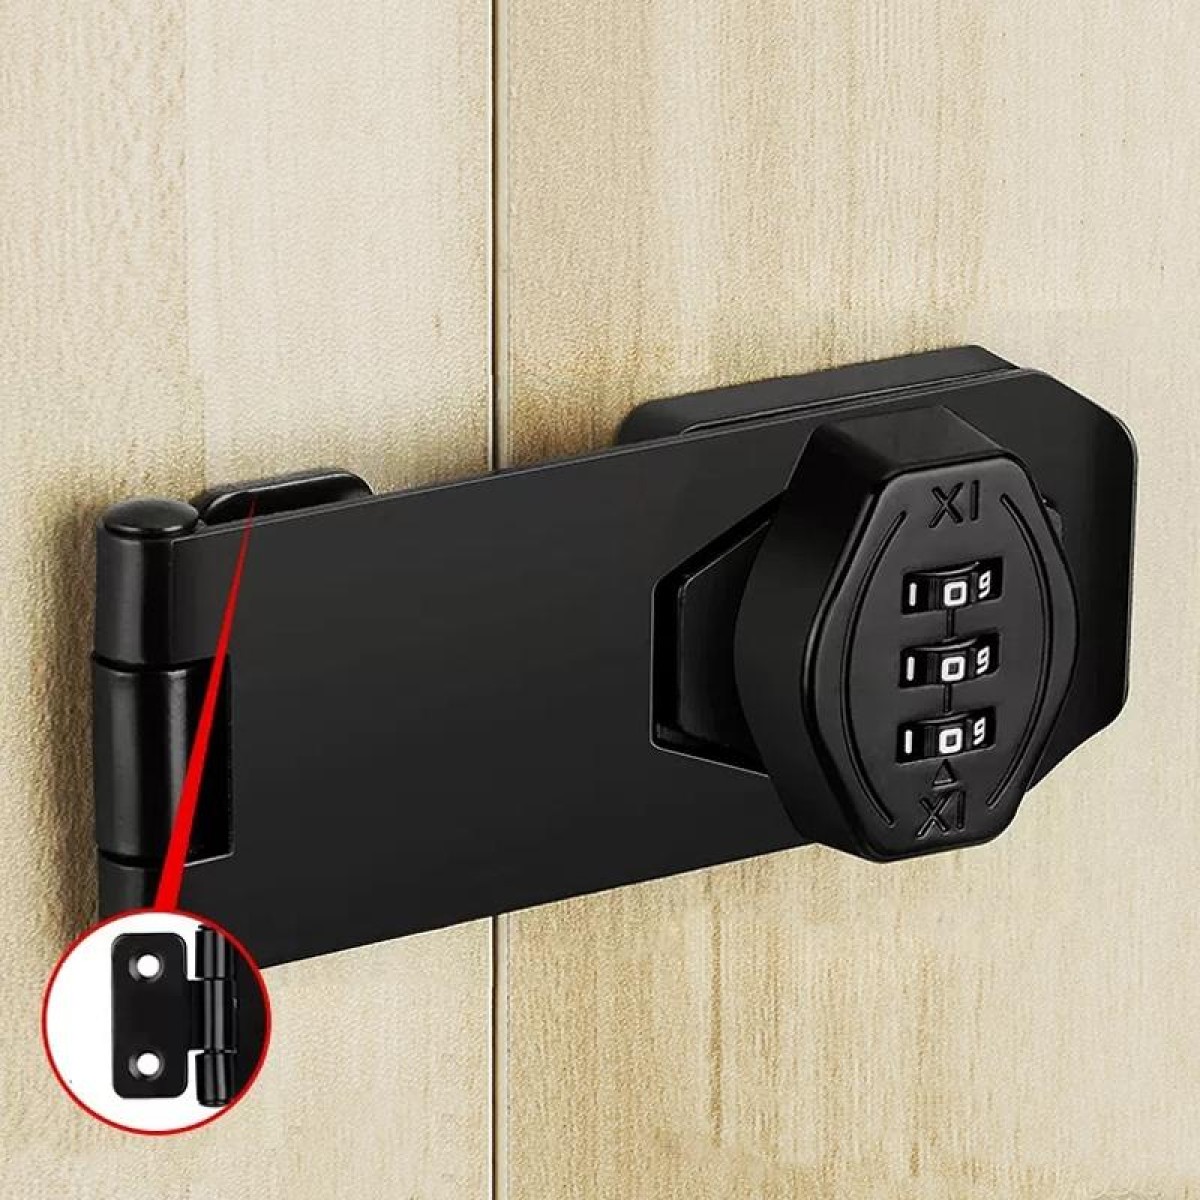 Stick Nail Dual Use Free Punch Cabinet Door Combination Lock Anti-Theft Drawer Lock, Style: Two Hole 3 inch Black